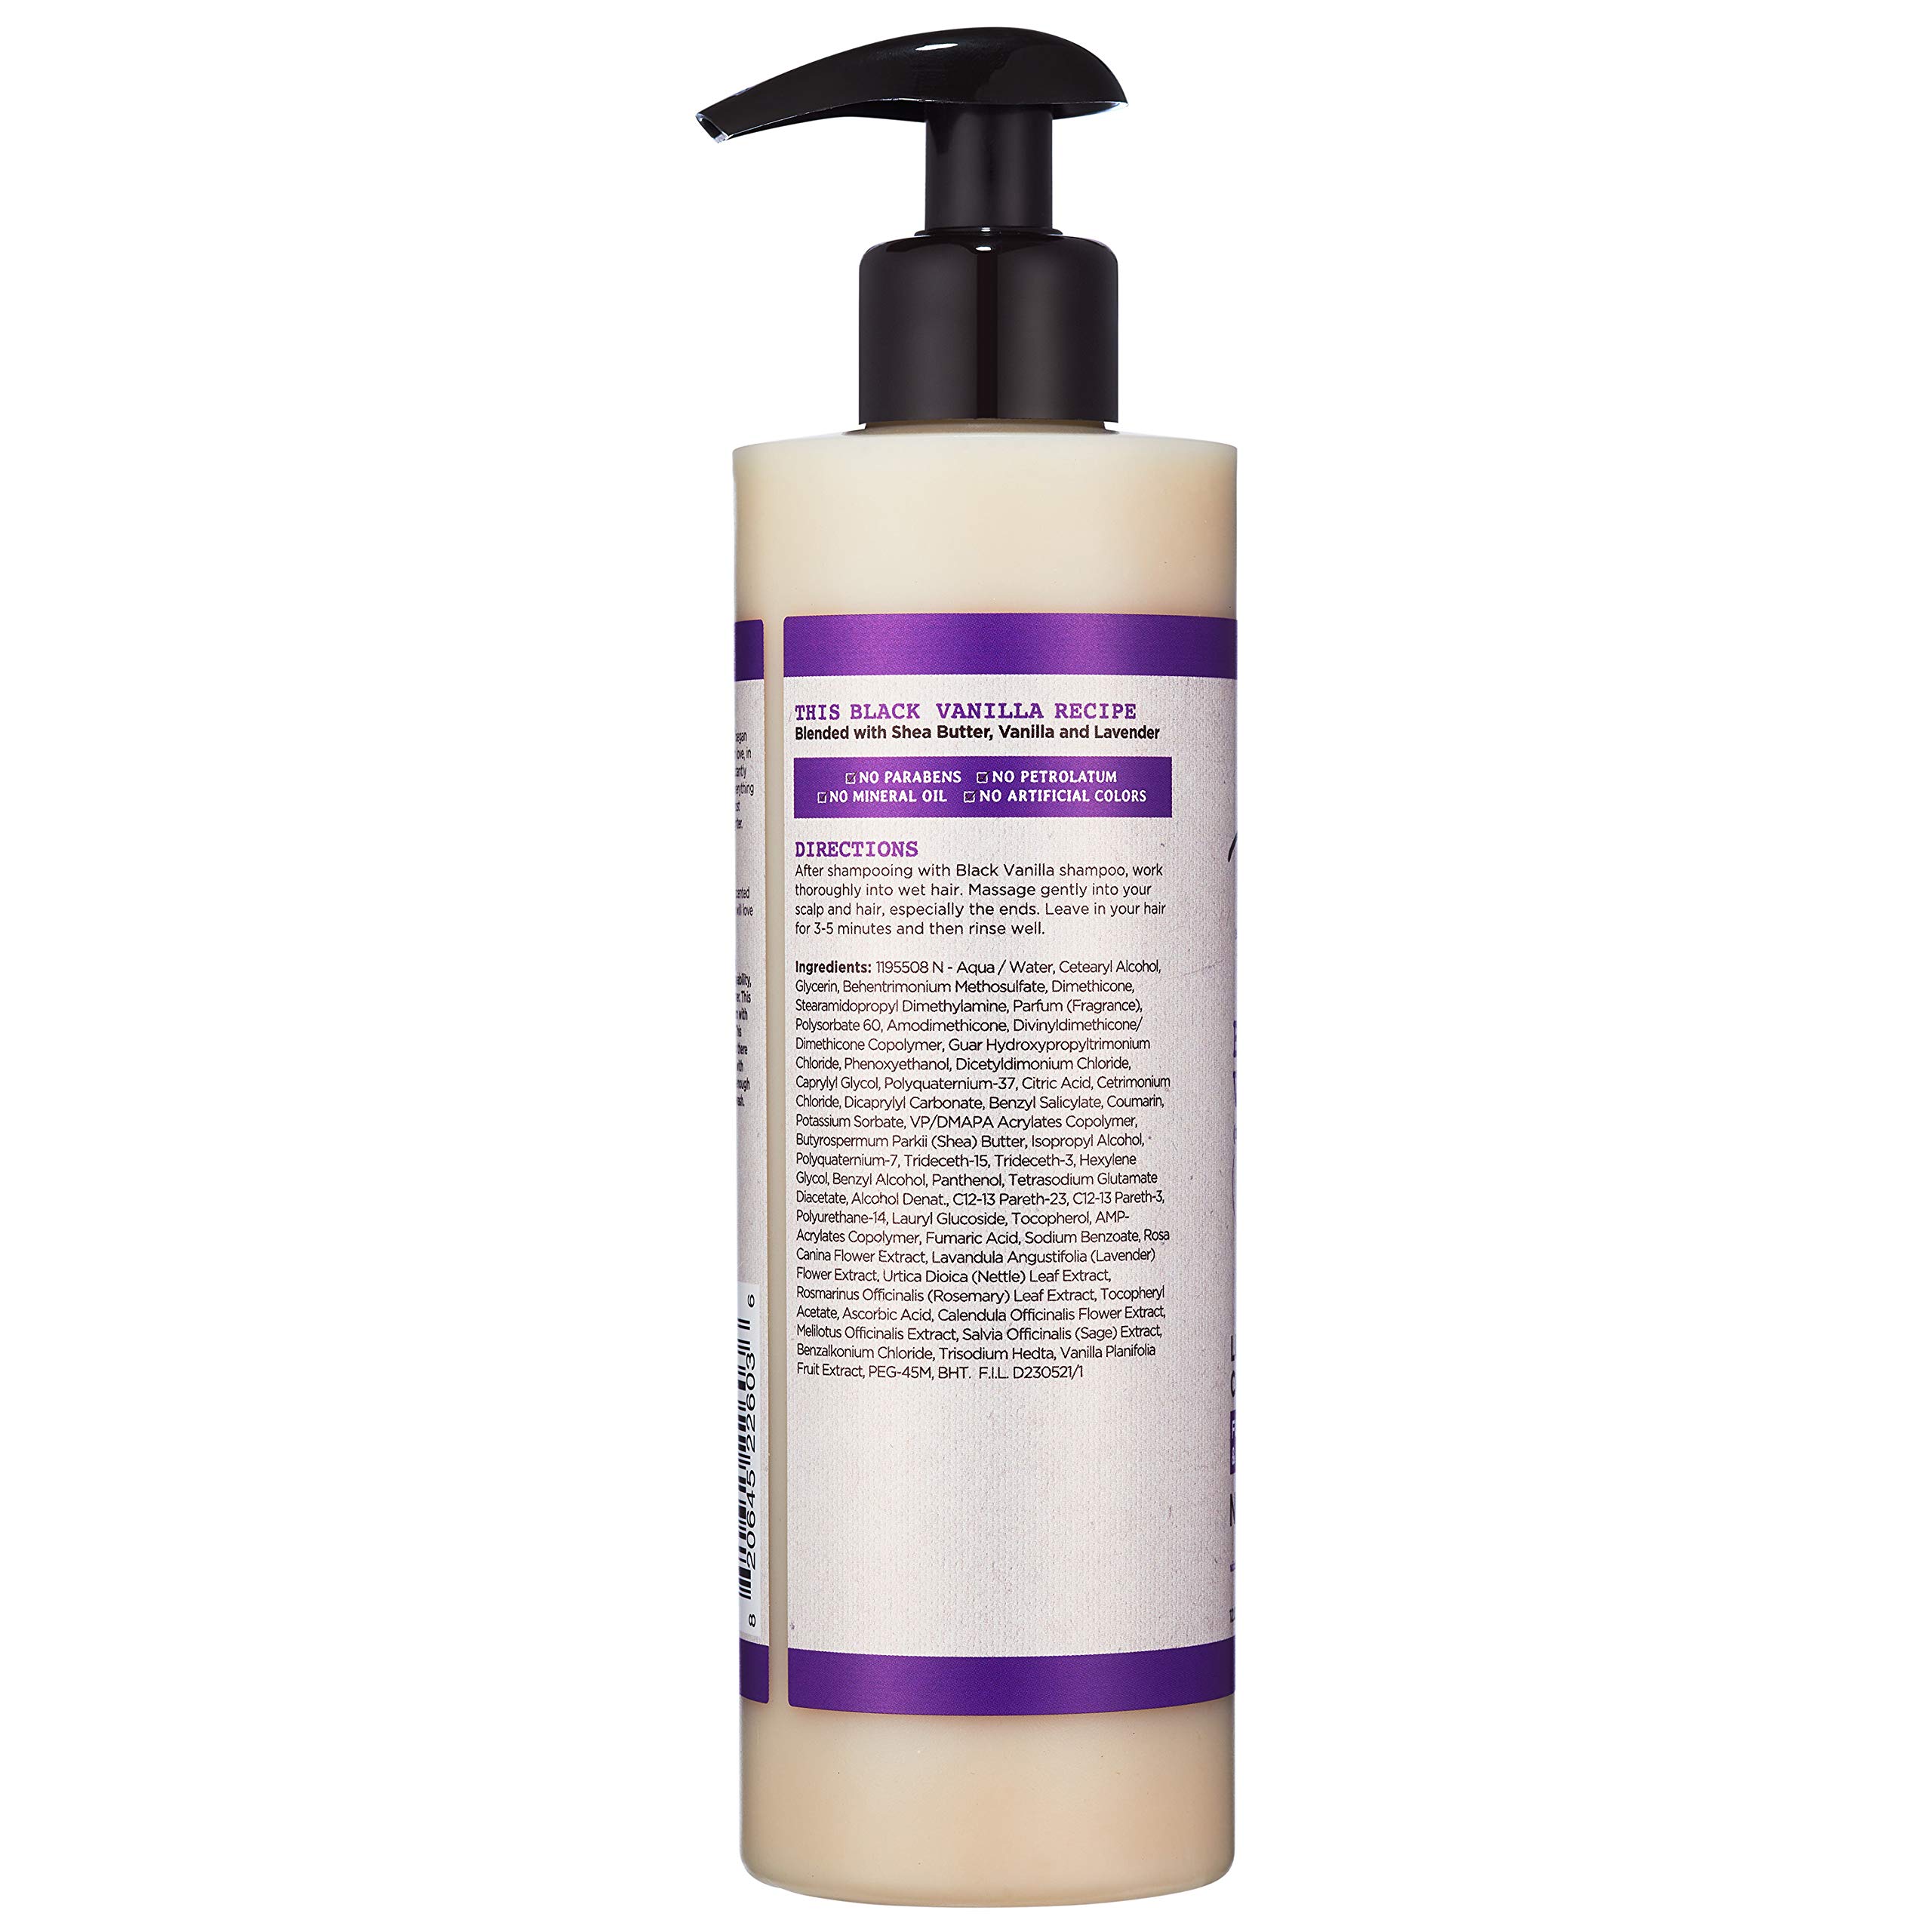 Carol’s Daughter Black Vanilla Moisturizing Conditioner, Adds Hydration & Shine to Dry, Damaged Hair- Made with Shea Butter and Rosemary, 8 fl oz (packaging may vary)